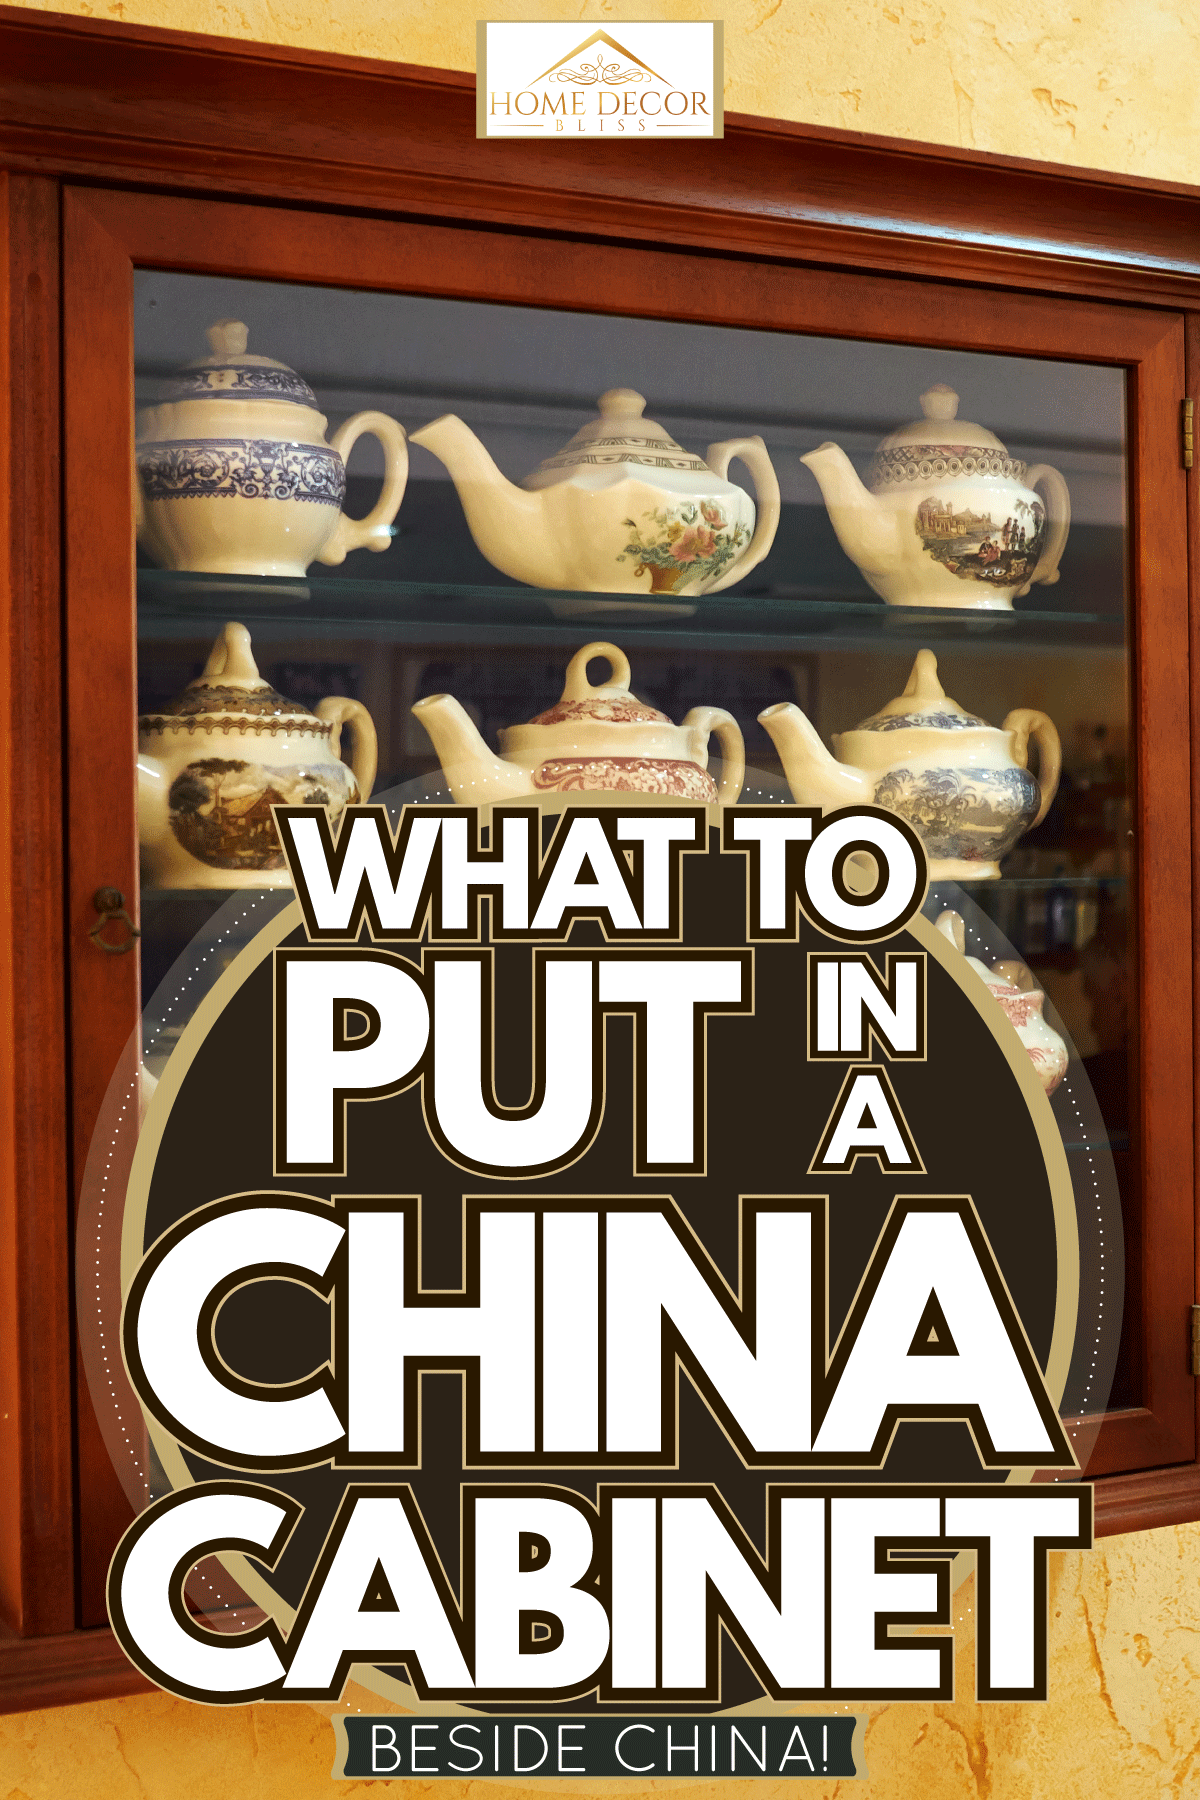 A wooden framed China Cabinet, What To Put In A China Cabinet [Besides China!]